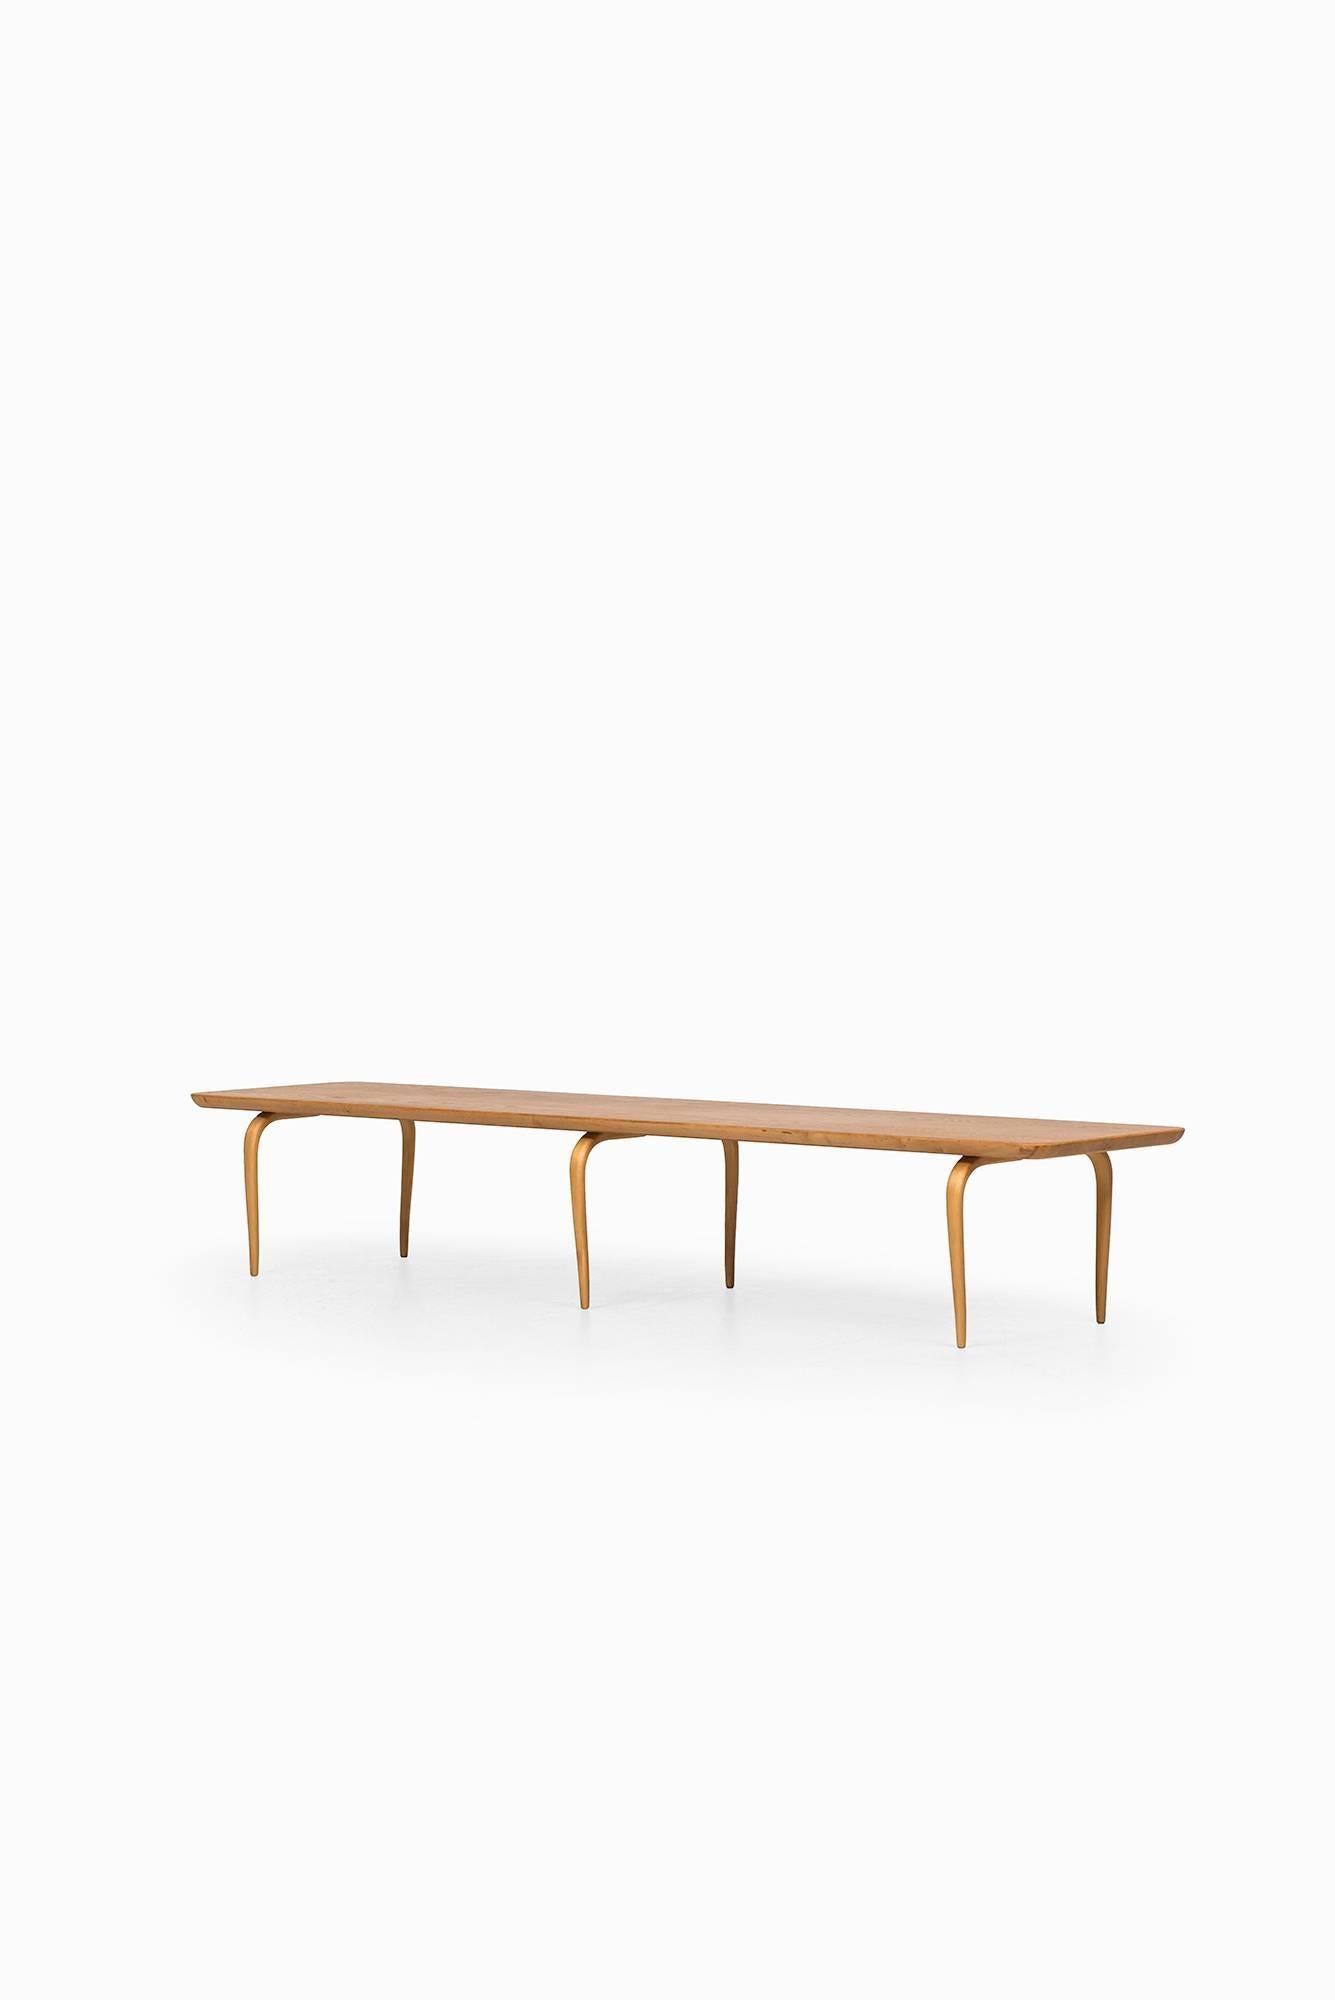 Rare low bench or side table designed by Bruno Mathsson. Produced by Karl Mathsson in Värnamo, Sweden.